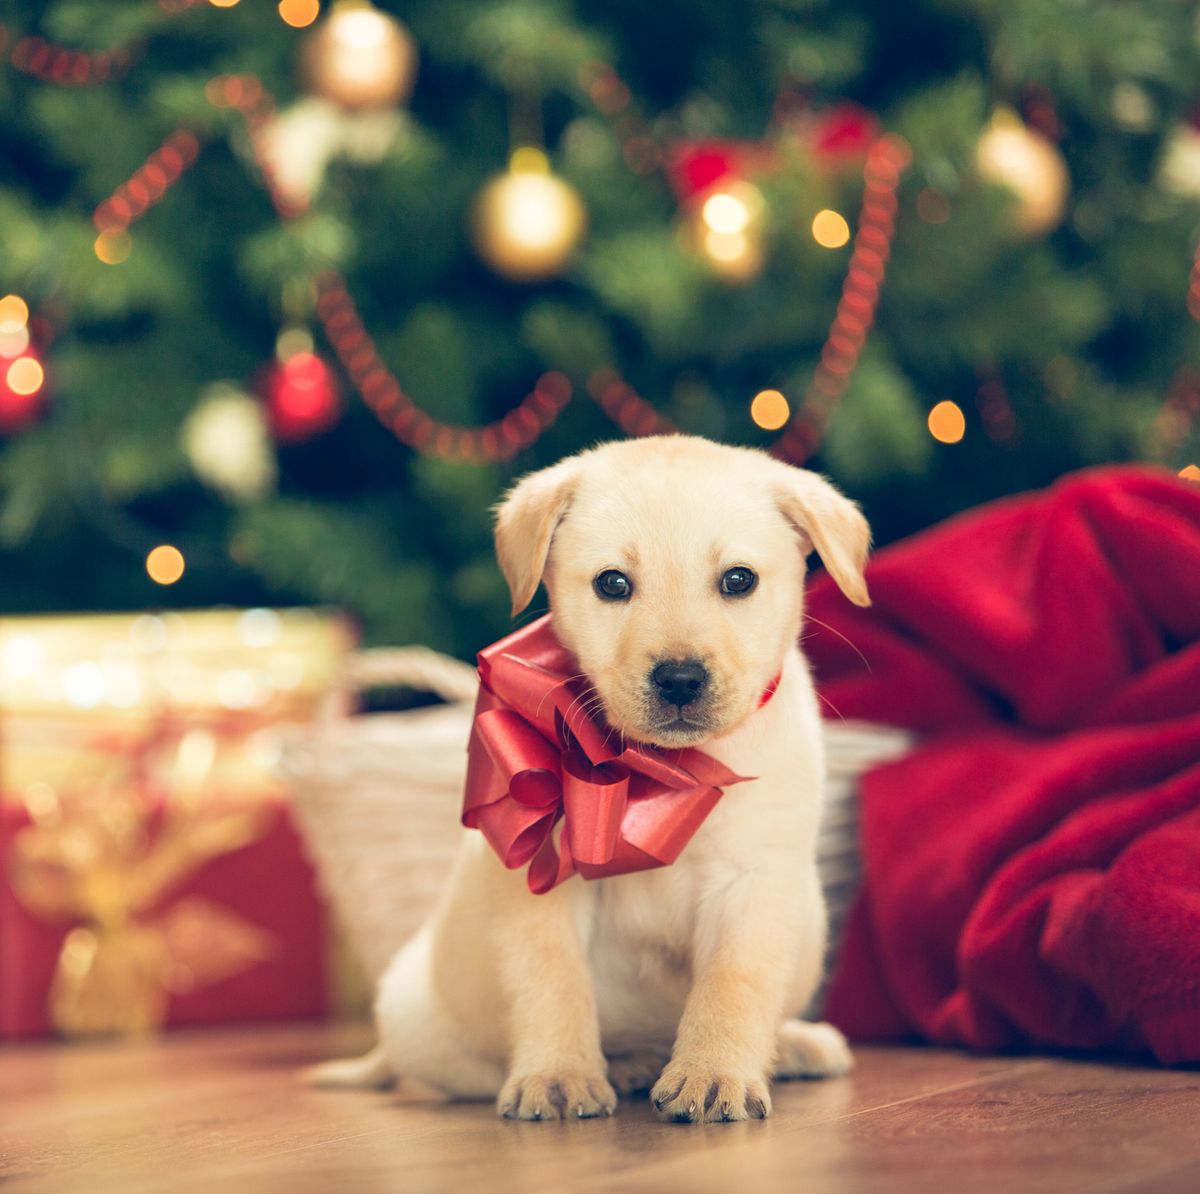 Do Pets Make Good Gifts? The Right Way to Gift a Dog or Cat